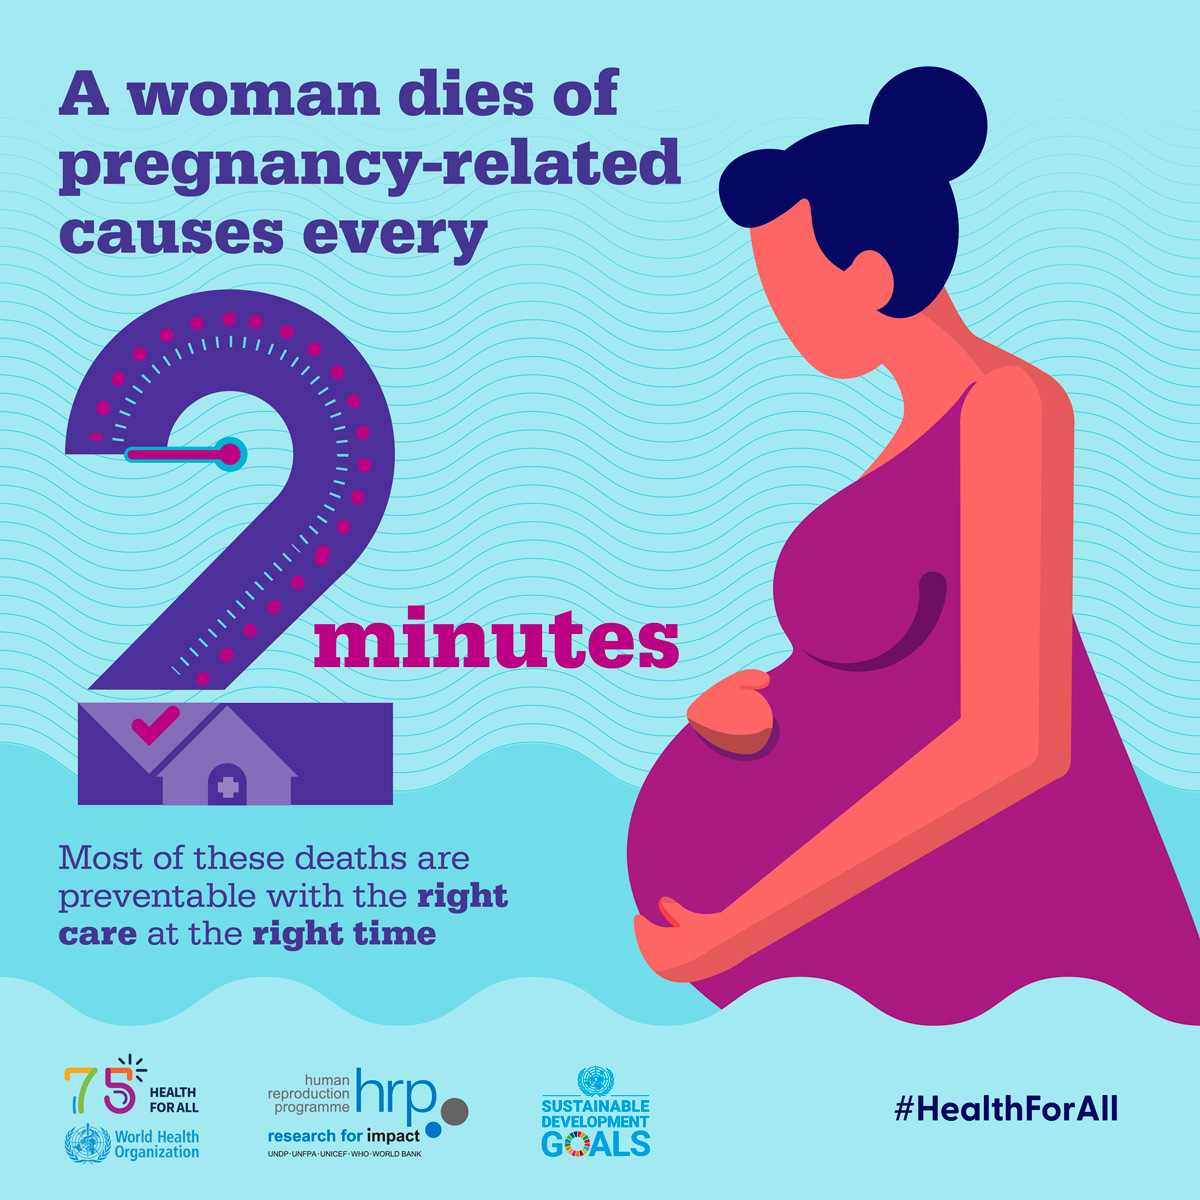 Every 2 minutes, a woman dies during pregnancy or childbirth. Most could be saved with the right care, at the right time. Women need quality, respectful healthcare before, during, and after pregnancy and childbirth. bit.ly/3lLG4UZ #HealthForAll via @WHO